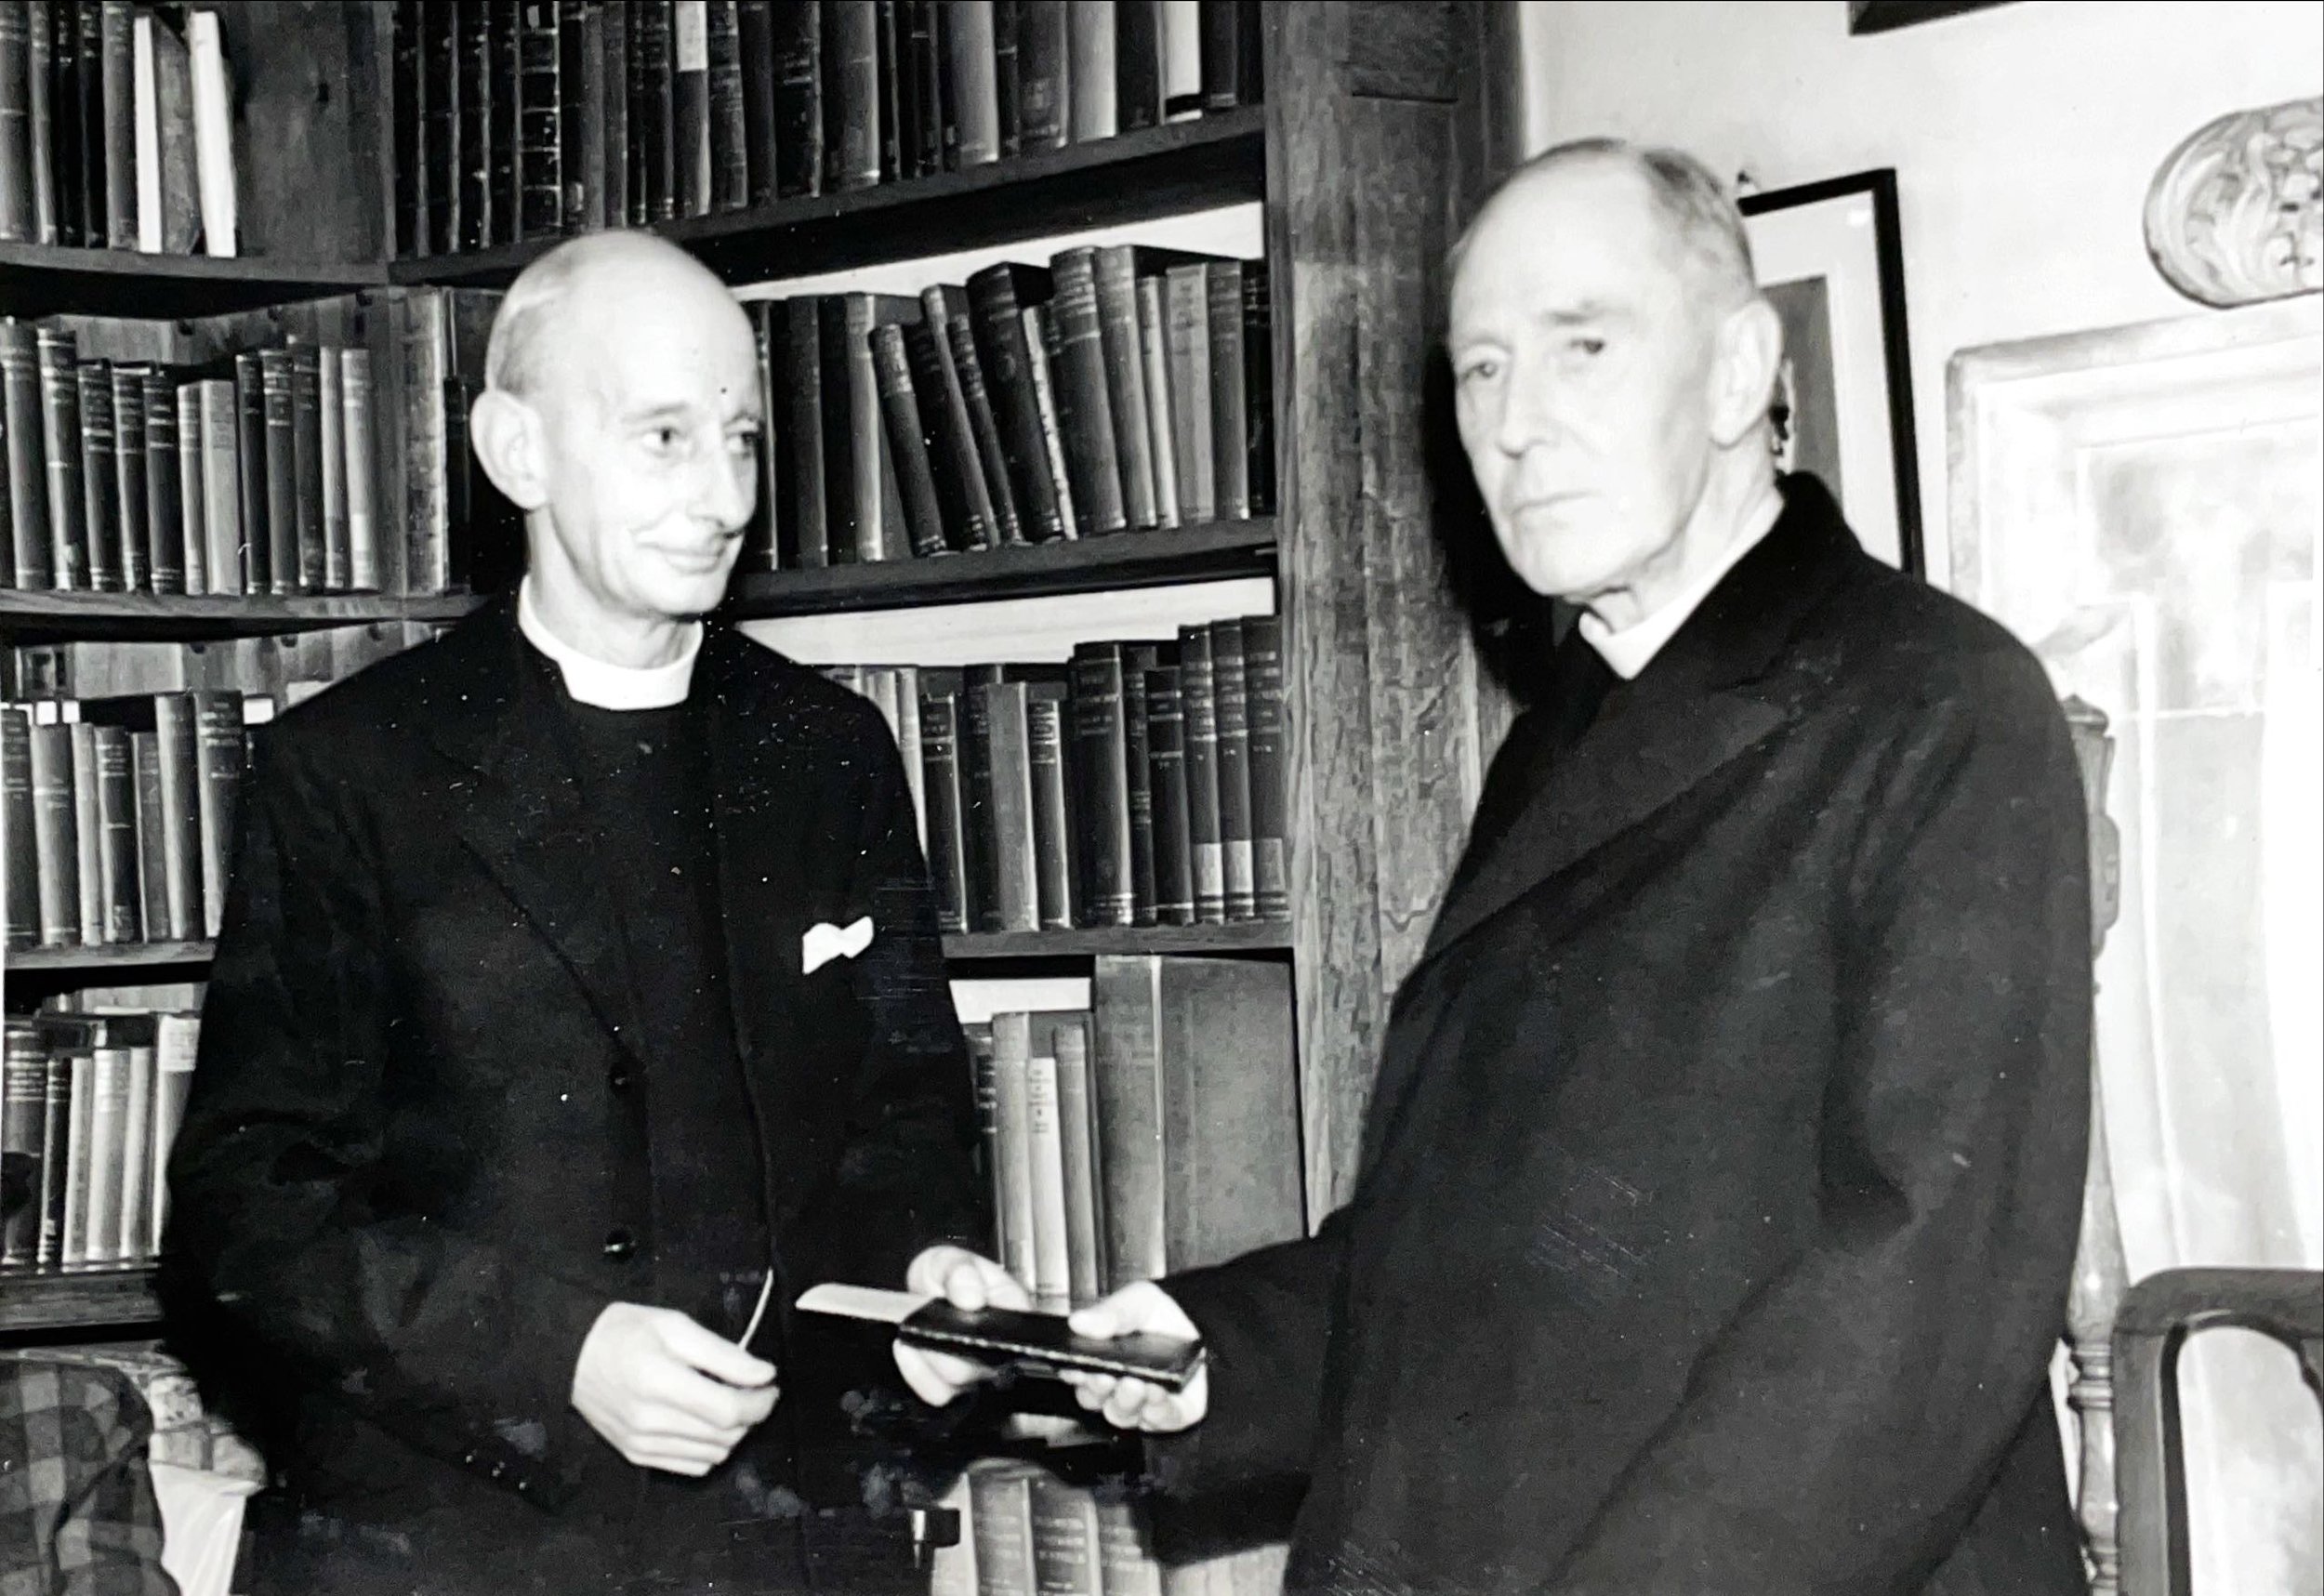 Canon Mackean, Vice Dean, presenting cheque to the Rev. H. G. Welch, Sacrist, on relinquishing appointment, October 1953